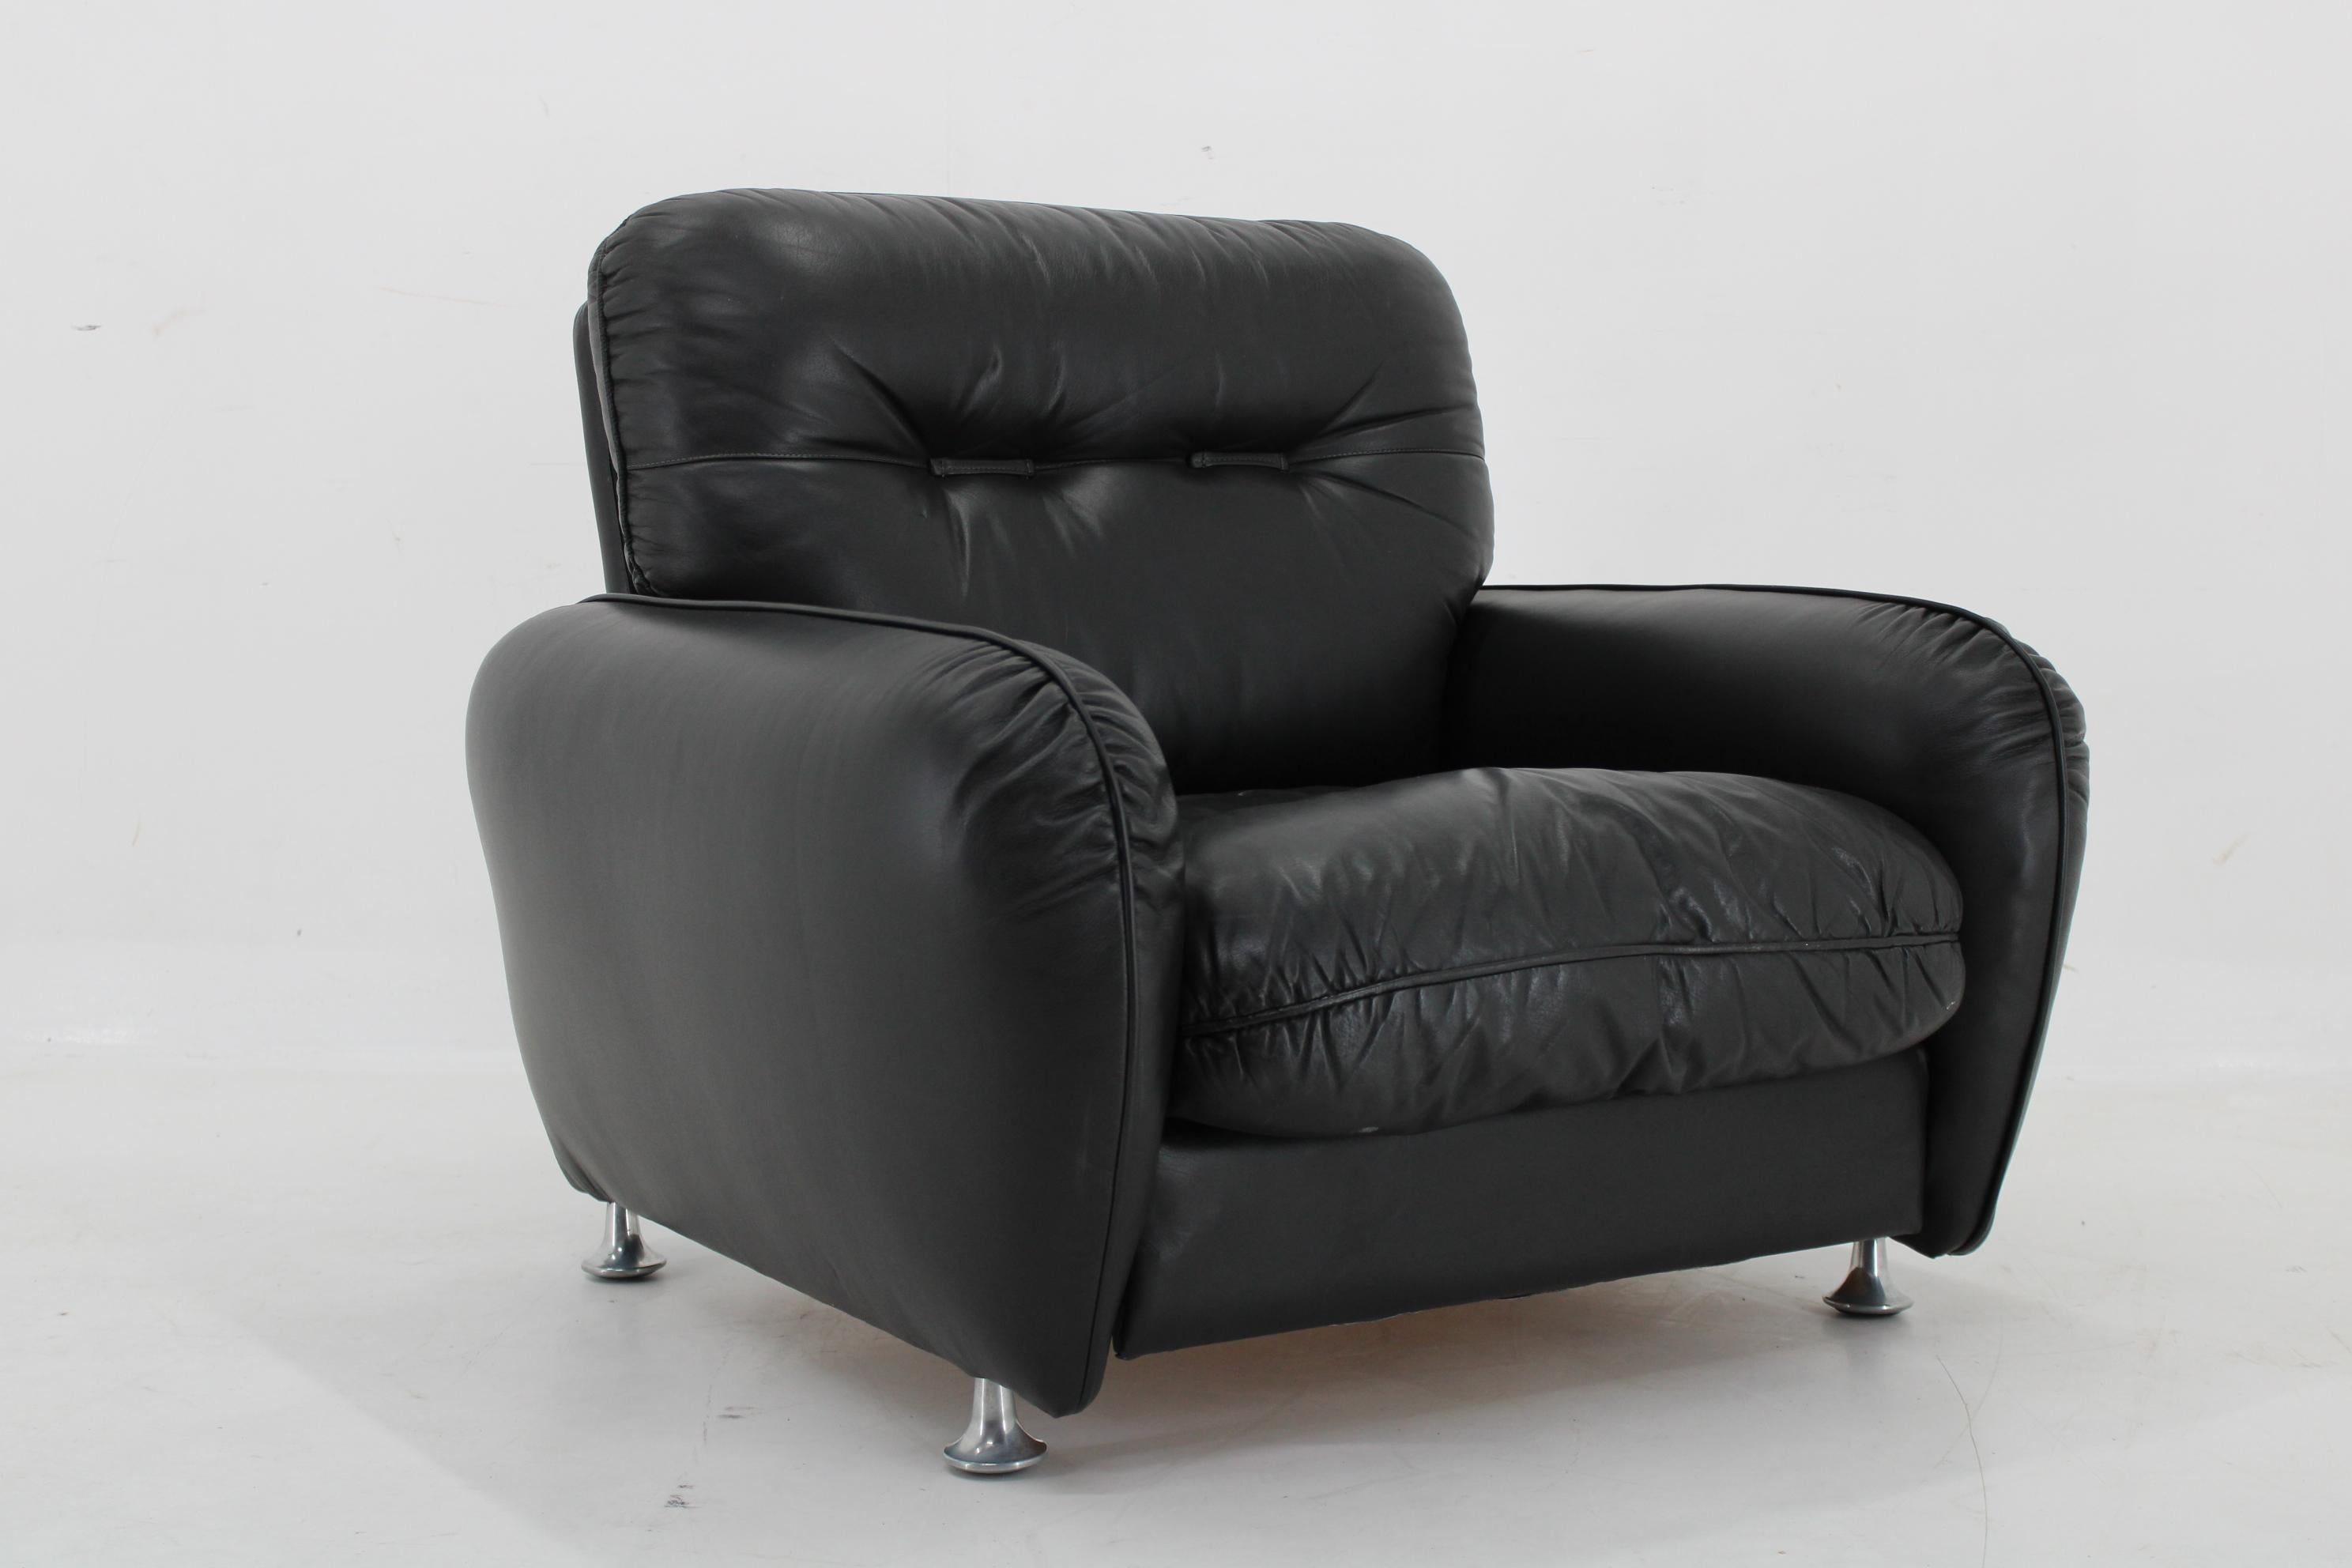 1970s Armchair in Black Leather, Italy For Sale 4